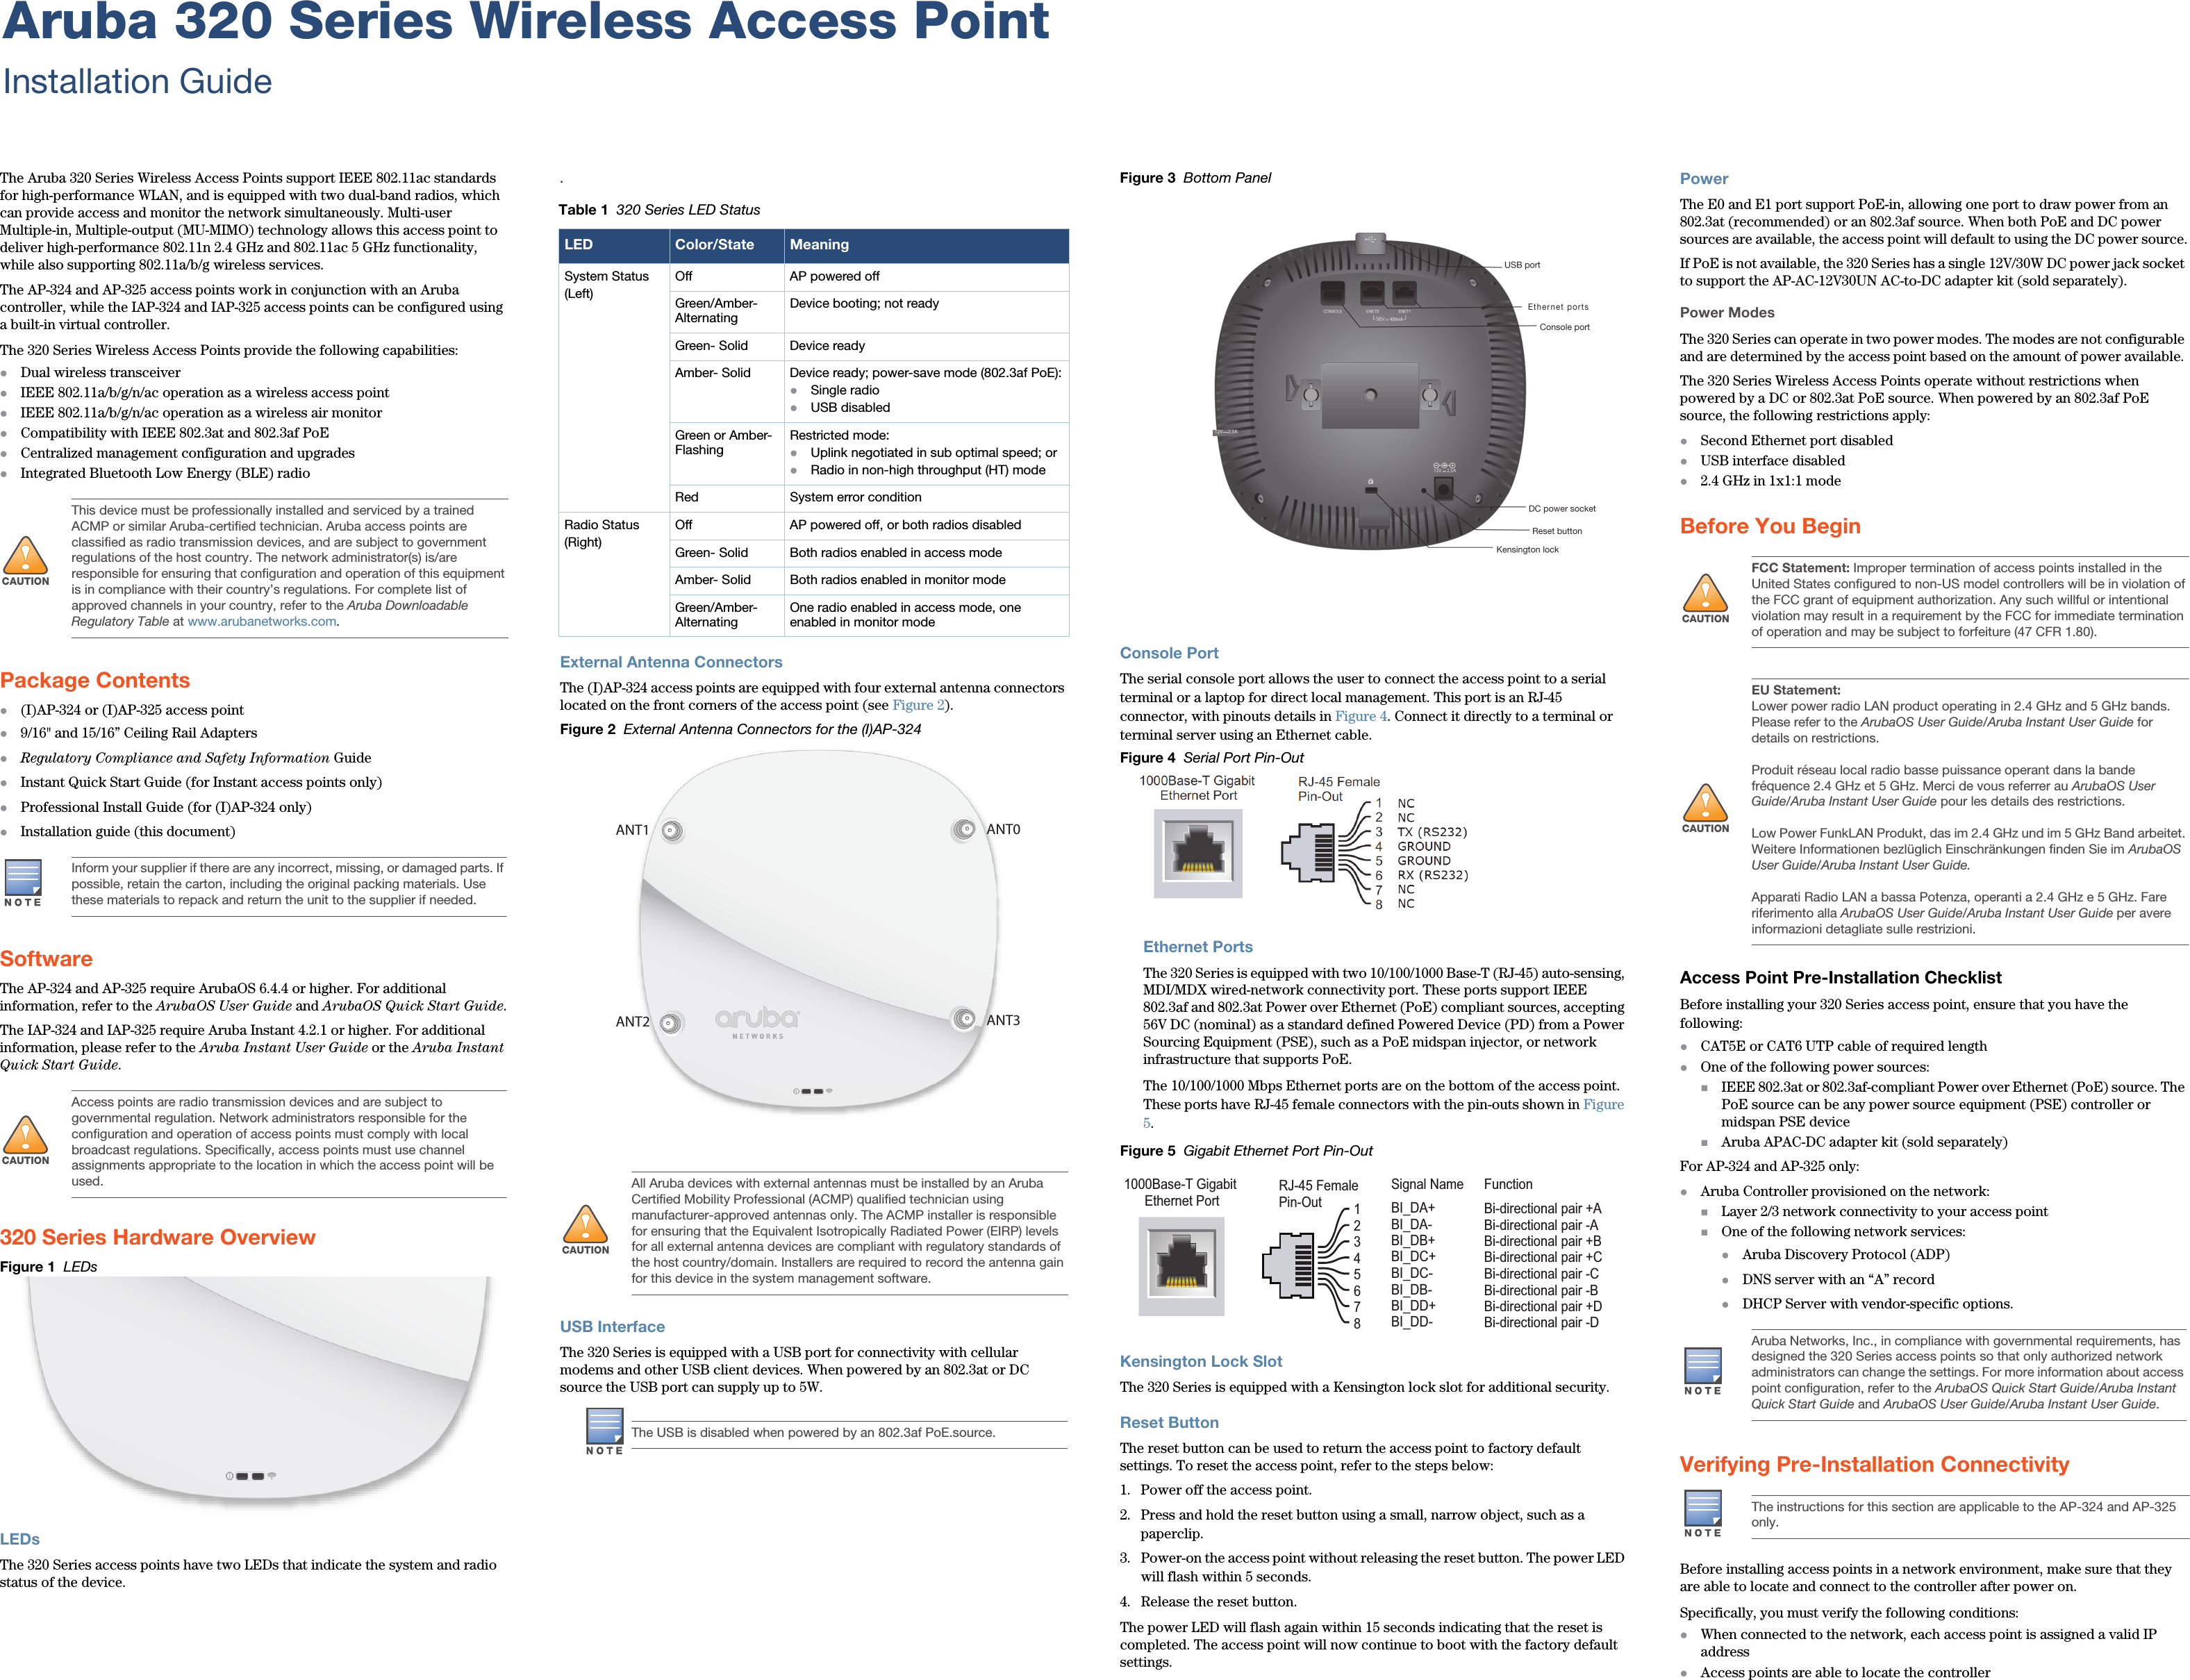 Aruba 320 Series Wireless Access PointInstallation GuideThe Aruba 320 Series Wireless Access Points support IEEE 802.11ac standards for high-performance WLAN, and is equipped with two dual-band radios, which can provide access and monitor the network simultaneously. Multi-user Multiple-in, Multiple-output (MU-MIMO) technology allows this access point to deliver high-performance 802.11n 2.4 GHz and 802.11ac 5 GHz functionality, while also supporting 802.11a/b/g wireless services.The AP-324 and AP-325 access points work in conjunction with an Aruba controller, while the IAP-324 and IAP-325 access points can be configured using a built-in virtual controller.The 320 Series Wireless Access Points provide the following capabilities:Dual wireless transceiverIEEE 802.11a/b/g/n/ac operation as a wireless access pointIEEE 802.11a/b/g/n/ac operation as a wireless air monitorCompatibility with IEEE 802.3at and 802.3af PoE Centralized management configuration and upgradesIntegrated Bluetooth Low Energy (BLE) radioPackage Contents(I)AP-324 or (I)AP-325 access point 9/16&quot; and 15/16” Ceiling Rail AdaptersRegulatory Compliance and Safety Information GuideInstant Quick Start Guide (for Instant access points only)Professional Install Guide (for (I)AP-324 only)Installation guide (this document)SoftwareThe AP-324 and AP-325 require ArubaOS 6.4.4 or higher. For additional information, refer to the ArubaOS User Guide and ArubaOS Quick Start Guide.The IAP-324 and IAP-325 require Aruba Instant 4.2.1 or higher. For additional information, please refer to the Aruba Instant User Guide or the Aruba Instant Quick Start Guide. 320 Series Hardware OverviewFigure 1  LEDsLEDsThe 320 Series access points have two LEDs that indicate the system and radio status of the device..External Antenna ConnectorsThe (I)AP-324 access points are equipped with four external antenna connectors located on the front corners of the access point (see Figure 2).Figure 2  External Antenna Connectors for the (I)AP-324 USB InterfaceThe 320 Series is equipped with a USB port for connectivity with cellular modems and other USB client devices. When powered by an 802.3at or DC source the USB port can supply up to 5W.Figure 3  Bottom Panel Console PortThe serial console port allows the user to connect the access point to a serial terminal or a laptop for direct local management. This port is an RJ-45 connector, with pinouts details in Figure 4. Connect it directly to a terminal or terminal server using an Ethernet cable.Figure 4  Serial Port Pin-OutEthernet PortsThe 320 Series is equipped with two 10/100/1000 Base-T (RJ-45) auto-sensing, MDI/MDX wired-network connectivity port. These ports support IEEE 802.3af and 802.3at Power over Ethernet (PoE) compliant sources, accepting 56V DC (nominal) as a standard defined Powered Device (PD) from a Power Sourcing Equipment (PSE), such as a PoE midspan injector, or network infrastructure that supports PoE.The 10/100/1000 Mbps Ethernet ports are on the bottom of the access point. These ports have RJ-45 female connectors with the pin-outs shown in Figure 5. Figure 5  Gigabit Ethernet Port Pin-OutKensington Lock SlotThe 320 Series is equipped with a Kensington lock slot for additional security. Reset ButtonThe reset button can be used to return the access point to factory default settings. To reset the access point, refer to the steps below:1. Power off the access point.2. Press and hold the reset button using a small, narrow object, such as a paperclip.3. Power-on the access point without releasing the reset button. The power LED will flash within 5 seconds.4. Release the reset button.The power LED will flash again within 15 seconds indicating that the reset is completed. The access point will now continue to boot with the factory default settings.PowerThe E0 and E1 port support PoE-in, allowing one port to draw power from an 802.3at (recommended) or an 802.3af source. When both PoE and DC power sources are available, the access point will default to using the DC power source.If PoE is not available, the 320 Series has a single 12V/30W DC power jack socket to support the AP-AC-12V30UN AC-to-DC adapter kit (sold separately).Power ModesThe 320 Series can operate in two power modes. The modes are not configurable and are determined by the access point based on the amount of power available. The 320 Series Wireless Access Points operate without restrictions when powered by a DC or 802.3at PoE source. When powered by an 802.3af PoE source, the following restrictions apply:Second Ethernet port disabledUSB interface disabled2.4 GHz in 1x1:1 modeBefore You BeginAccess Point Pre-Installation ChecklistBefore installing your 320 Series access point, ensure that you have the following:CAT5E or CAT6 UTP cable of required lengthOne of the following power sources:IEEE 802.3at or 802.3af-compliant Power over Ethernet (PoE) source. The PoE source can be any power source equipment (PSE) controller or midspan PSE deviceAruba APAC-DC adapter kit (sold separately)For AP-324 and AP-325 only:Aruba Controller provisioned on the network:Layer 2/3 network connectivity to your access pointOne of the following network services:Aruba Discovery Protocol (ADP)DNS server with an “A” recordDHCP Server with vendor-specific options.Verifying Pre-Installation Connectivity Before installing access points in a network environment, make sure that they are able to locate and connect to the controller after power on.Specifically, you must verify the following conditions:When connected to the network, each access point is assigned a valid IP addressAccess points are able to locate the controller !CAUTIONThis device must be professionally installed and serviced by a trained ACMP or similar Aruba-certified technician. Aruba access points are classified as radio transmission devices, and are subject to government regulations of the host country. The network administrator(s) is/are responsible for ensuring that configuration and operation of this equipment is in compliance with their country’s regulations. For complete list of approved channels in your country, refer to the Aruba Downloadable Regulatory Table at www.arubanetworks.com.Inform your supplier if there are any incorrect, missing, or damaged parts. If possible, retain the carton, including the original packing materials. Use these materials to repack and return the unit to the supplier if needed.!CAUTIONAccess points are radio transmission devices and are subject to governmental regulation. Network administrators responsible for the configuration and operation of access points must comply with local broadcast regulations. Specifically, access points must use channel assignments appropriate to the location in which the access point will be used.Table 1  320 Series LED StatusLED Color/State MeaningSystem Status(Left)Off AP powered offGreen/Amber- Alternating Device booting; not readyGreen- Solid Device readyAmber- Solid Device ready; power-save mode (802.3af PoE):Single radioUSB disabledGreen or Amber- Flashing Restricted mode:Uplink negotiated in sub optimal speed; orRadio in non-high throughput (HT) modeRed System error conditionRadio Status(Right)Off AP powered off, or both radios disabledGreen- Solid Both radios enabled in access modeAmber- Solid Both radios enabled in monitor modeGreen/Amber- Alternating One radio enabled in access mode, one enabled in monitor mode!CAUTIONAll Aruba devices with external antennas must be installed by an Aruba Certified Mobility Professional (ACMP) qualified technician using manufacturer-approved antennas only. The ACMP installer is responsible for ensuring that the Equivalent Isotropically Radiated Power (EIRP) levels for all external antenna devices are compliant with regulatory standards of the host country/domain. Installers are required to record the antenna gain for this device in the system management software.The USB is disabled when powered by an 802.3af PoE.source.ANT1 ANT0ANT2 ANT312V     2.5A. . .12V ... 2.5A1000Base-T Gigabit Ethernet PortRJ-45 FemalePin-OutSignal Name12345678BI_DC+BI_DC-BI_DD+BI_DD-BI_DA+BI_DA-BI_DB+BI_DB-FunctionBi-directional pair +CBi-directional pair -CBi-directional pair +DBi-directional pair -DBi-directional pair +ABi-directional pair -ABi-directional pair +BBi-directional pair -B !CAUTIONFCC Statement: Improper termination of access points installed in the United States configured to non-US model controllers will be in violation of the FCC grant of equipment authorization. Any such willful or intentional violation may result in a requirement by the FCC for immediate termination of operation and may be subject to forfeiture (47 CFR 1.80).!CAUTIONEU Statement: Lower power radio LAN product operating in 2.4 GHz and 5 GHz bands. Please refer to the ArubaOS User Guide/Aruba Instant User Guide for details on restrictions.Produit réseau local radio basse puissance operant dans la bande fréquence 2.4 GHz et 5 GHz. Merci de vous referrer au ArubaOS User Guide/Aruba Instant User Guide pour les details des restrictions.Low Power FunkLAN Produkt, das im 2.4 GHz und im 5 GHz Band arbeitet. Weitere Informationen bezlüglich Einschränkungen finden Sie im ArubaOS User Guide/Aruba Instant User Guide.Apparati Radio LAN a bassa Potenza, operanti a 2.4 GHz e 5 GHz. Fare riferimento alla ArubaOS User Guide/Aruba Instant User Guide per avere informazioni detagliate sulle restrizioni.Aruba Networks, Inc., in compliance with governmental requirements, has designed the 320 Series access points so that only authorized network administrators can change the settings. For more information about access point configuration, refer to the ArubaOS Quick Start Guide/Aruba Instant Quick Start Guide and ArubaOS User Guide/Aruba Instant User Guide.The instructions for this section are applicable to the AP-324 and AP-325 only.